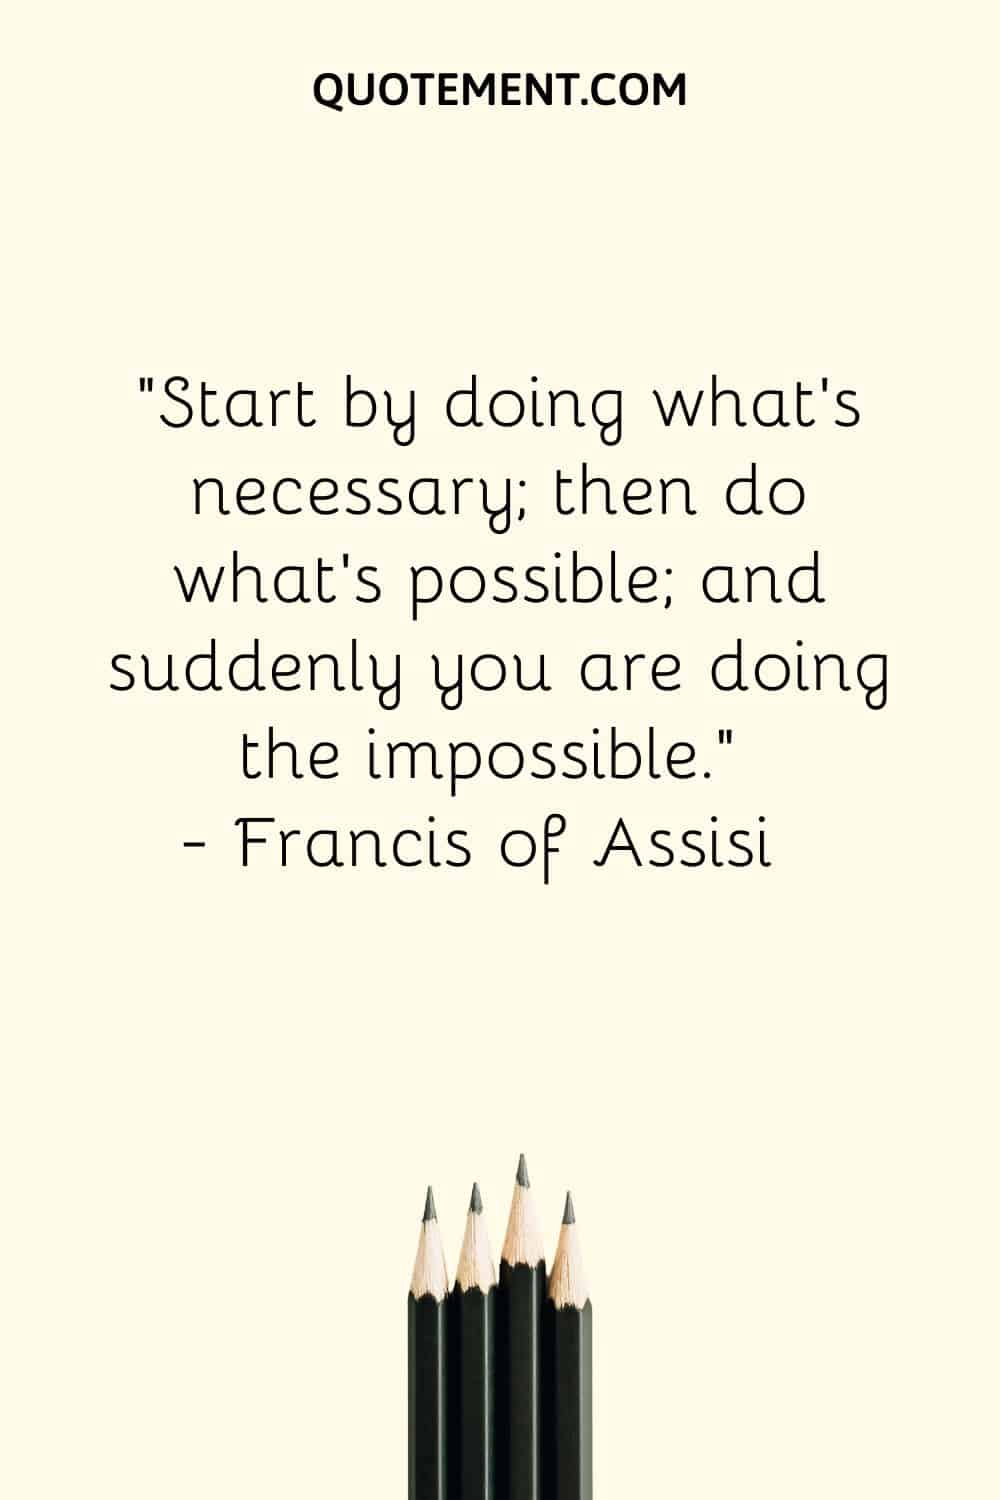 Start by doing what’s necessary; then do what’s possible